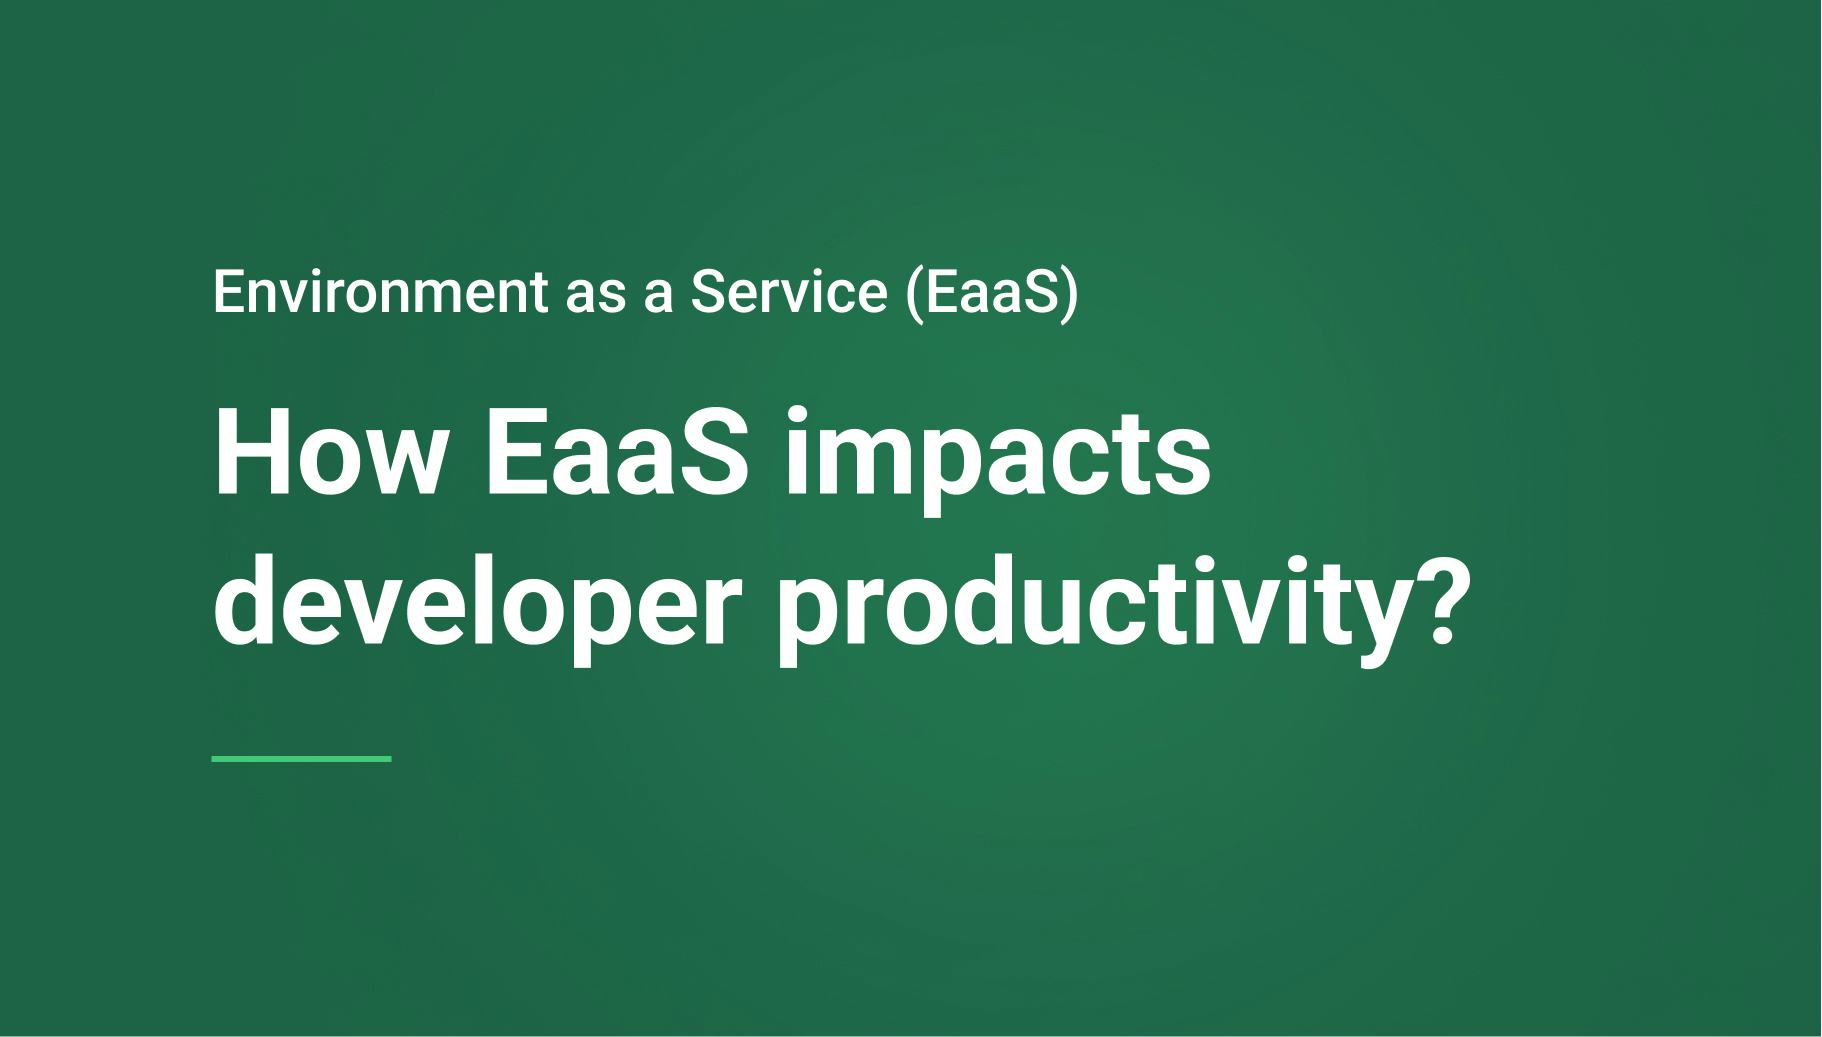 What is Environment as a Service (EaaS) and How is it Impacting Productivity? - Qovery